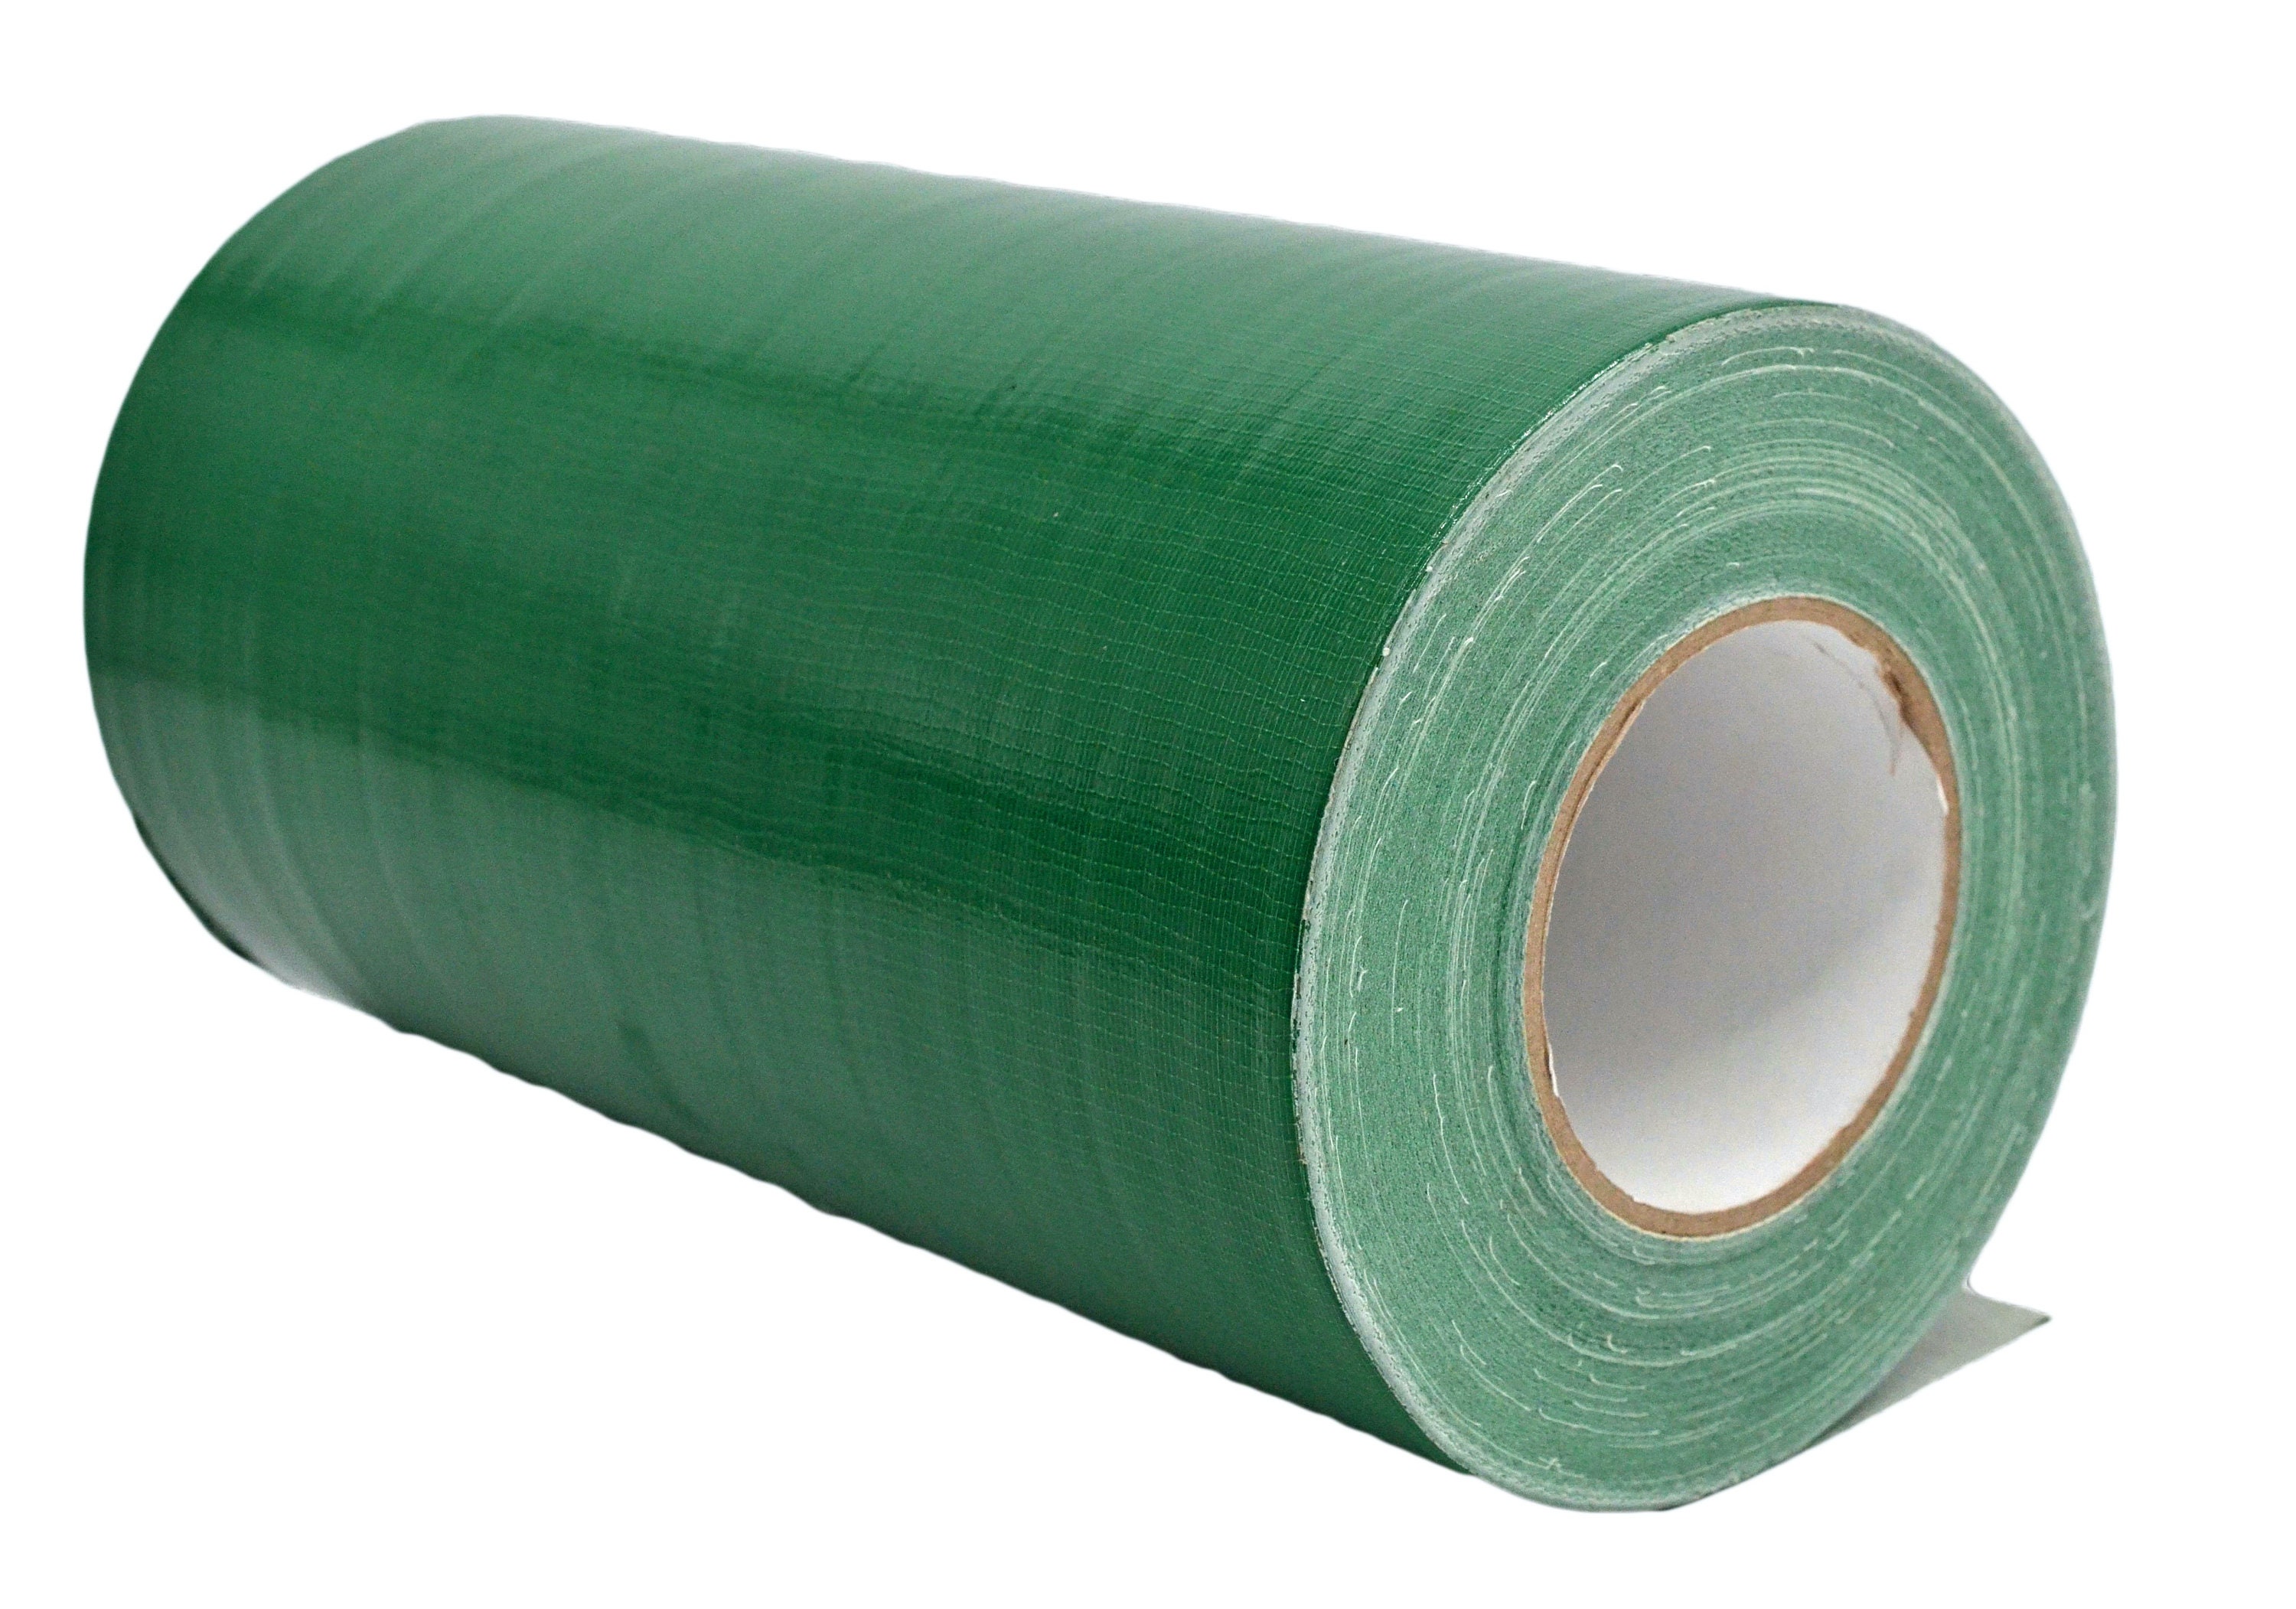 WOD DTC10 Advanced Strength Industrial Grade Dark Green Duct Tape, 4 inch x  60 yds. Waterproof, UV Resistant For Crafts & Home Improvement